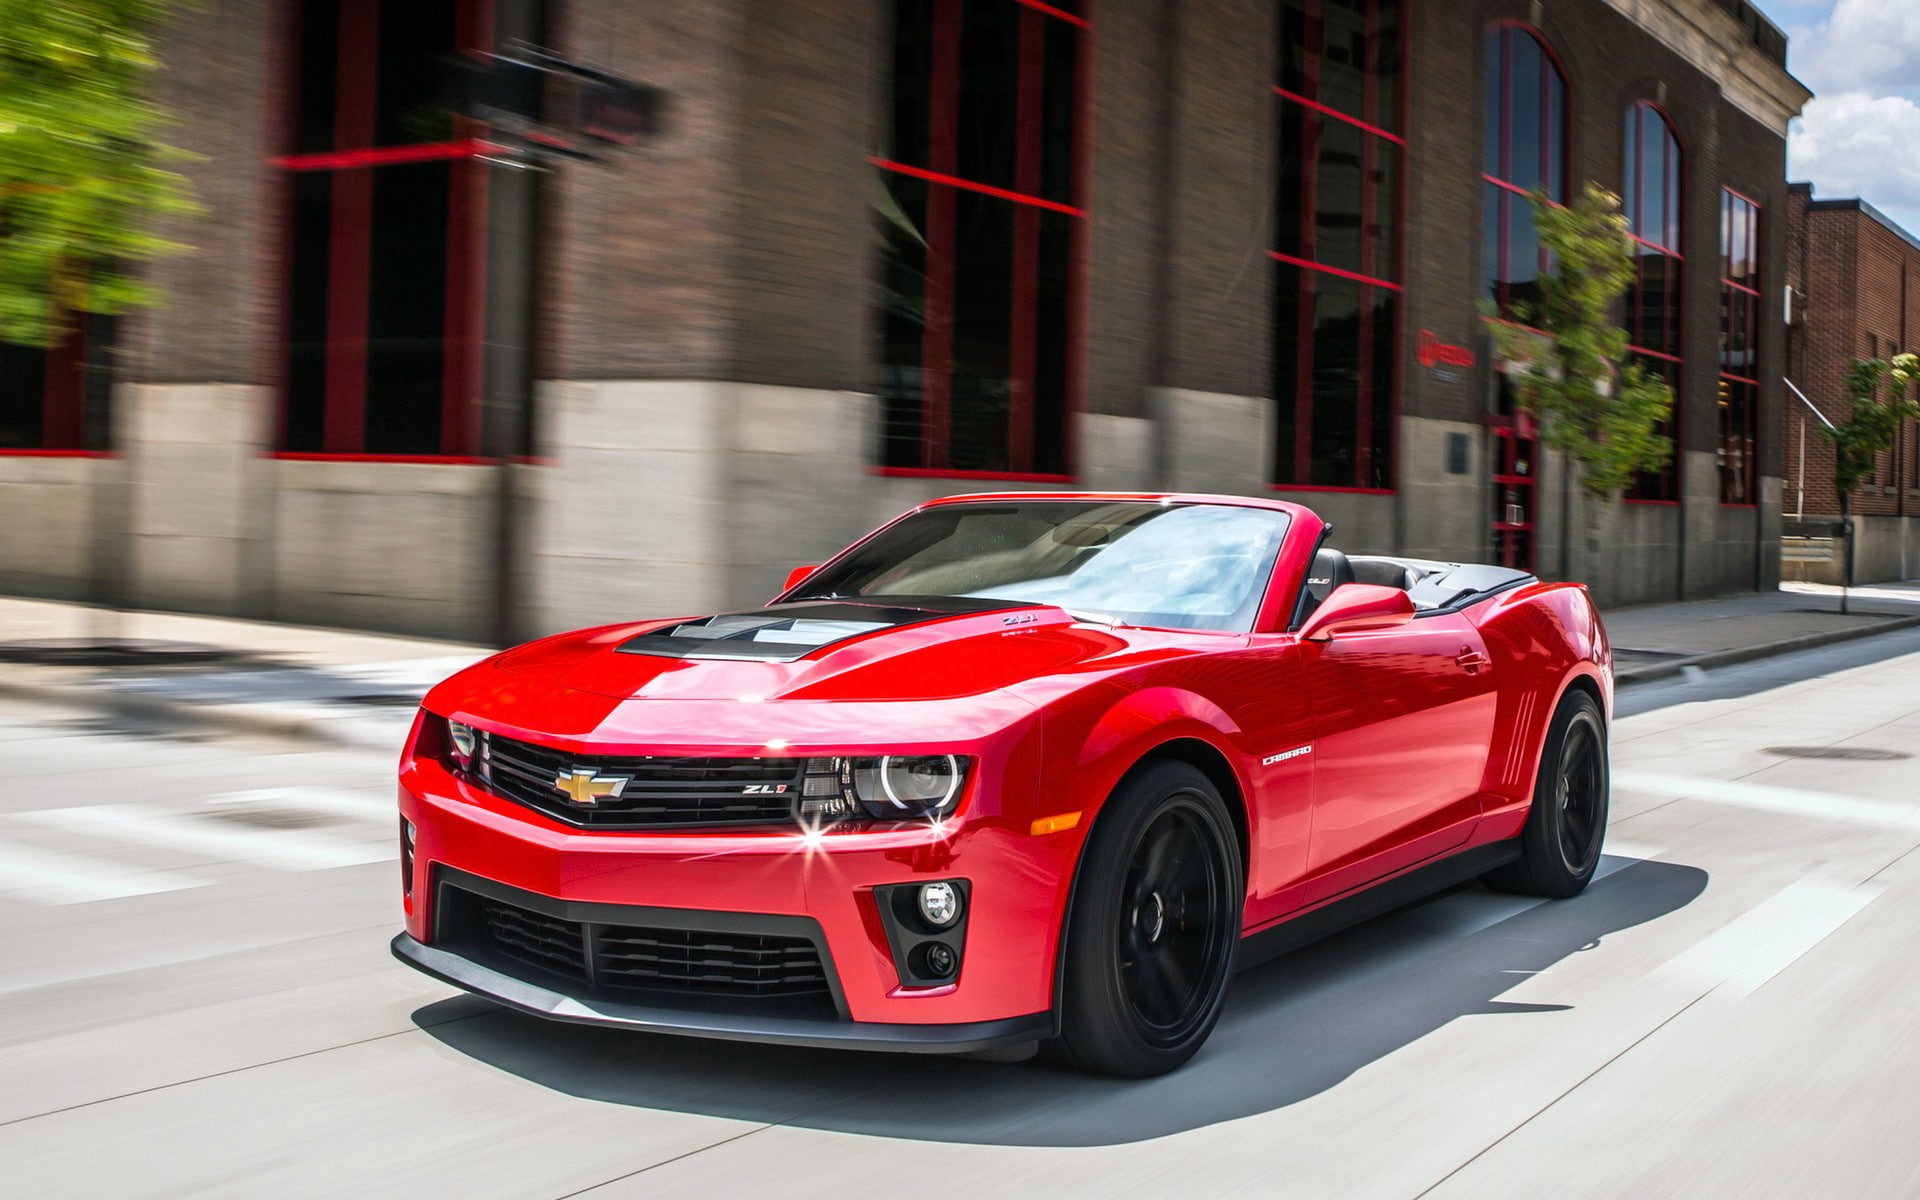 Chevrolet Camaro ZL1 Motion Blur HD, red chevrolet convertible coupe